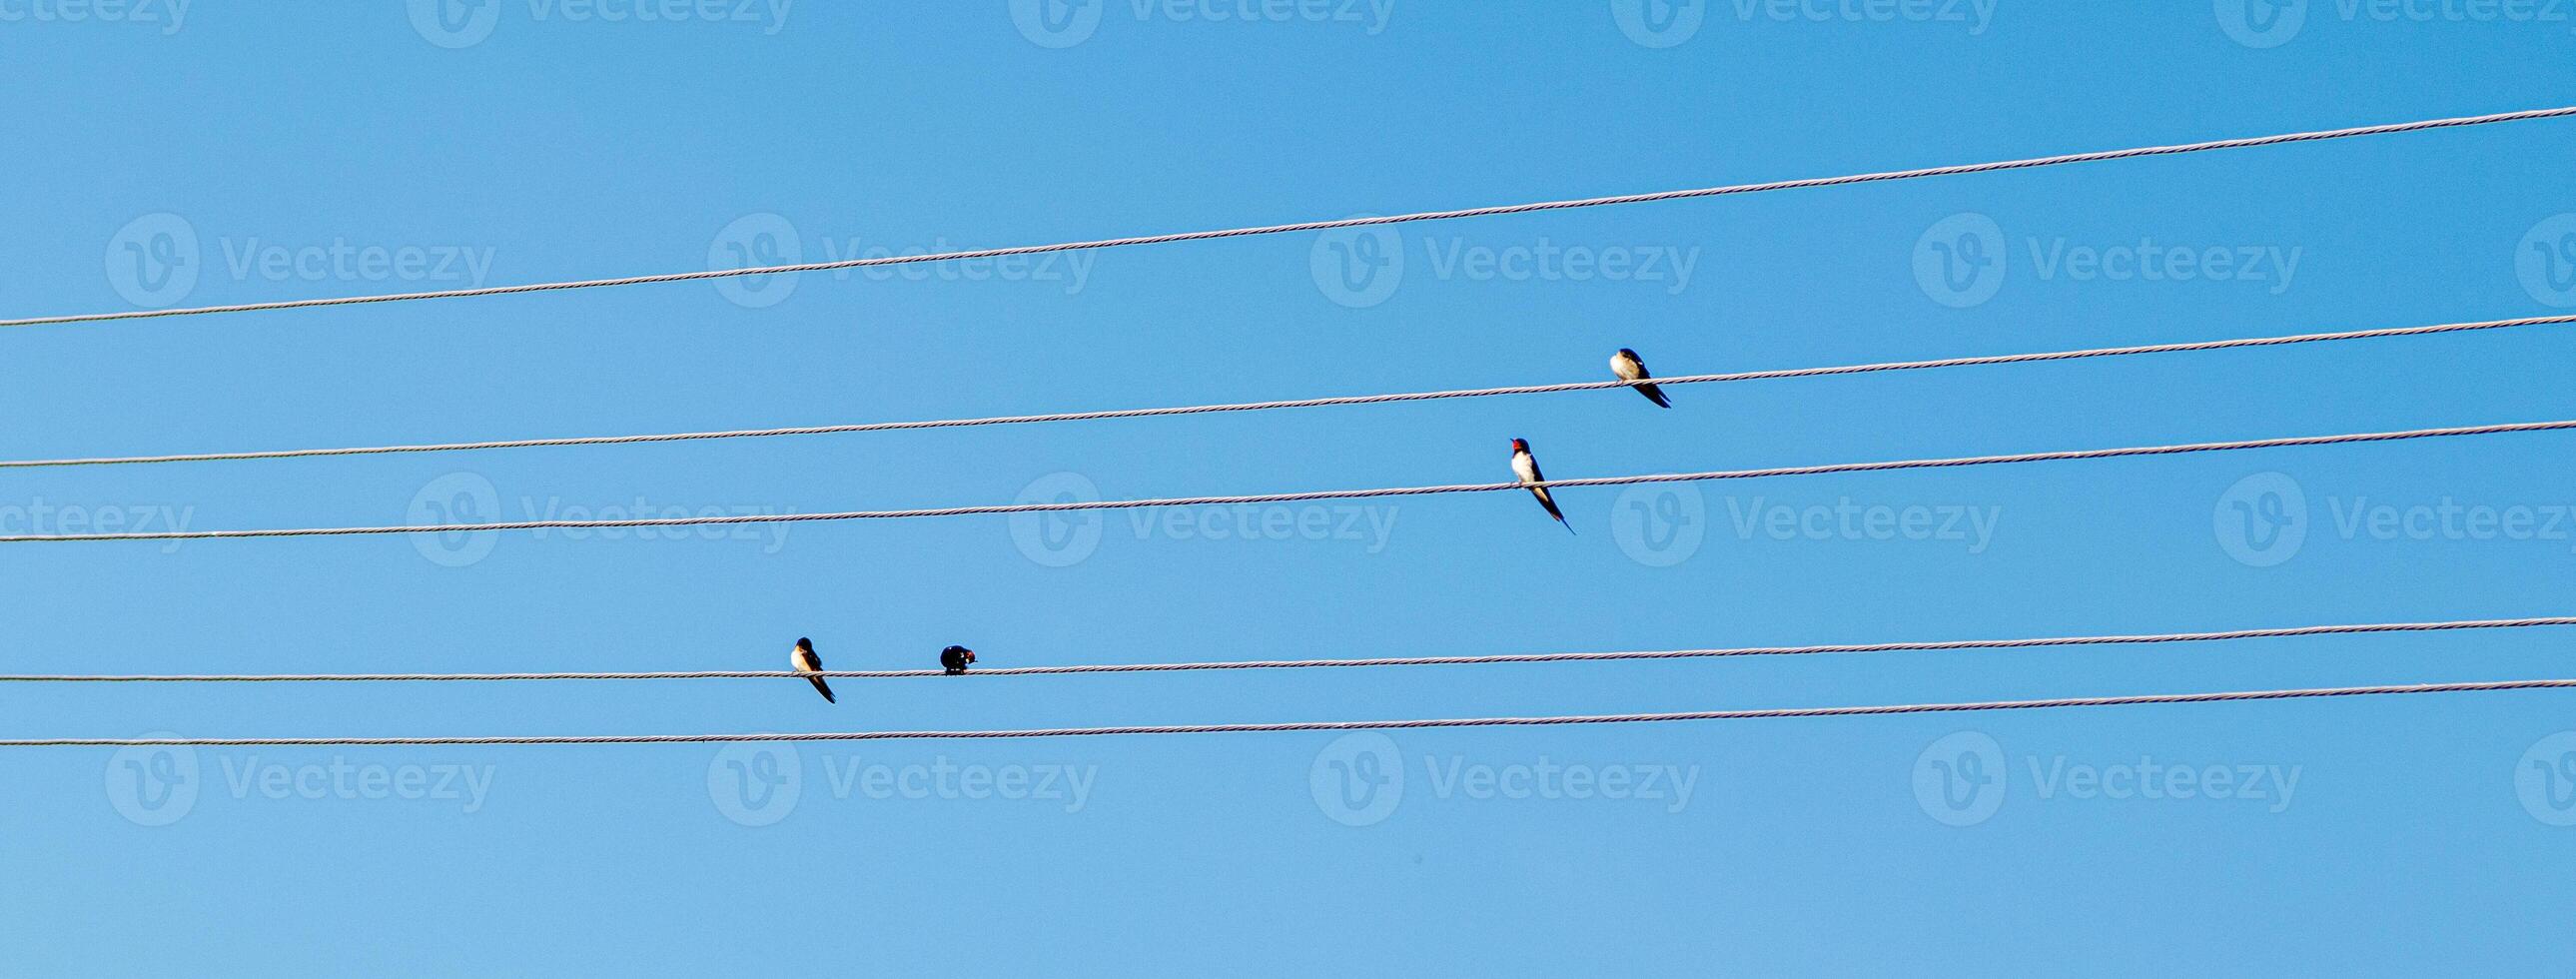 Birds sit on electric wires against the blue sky photo